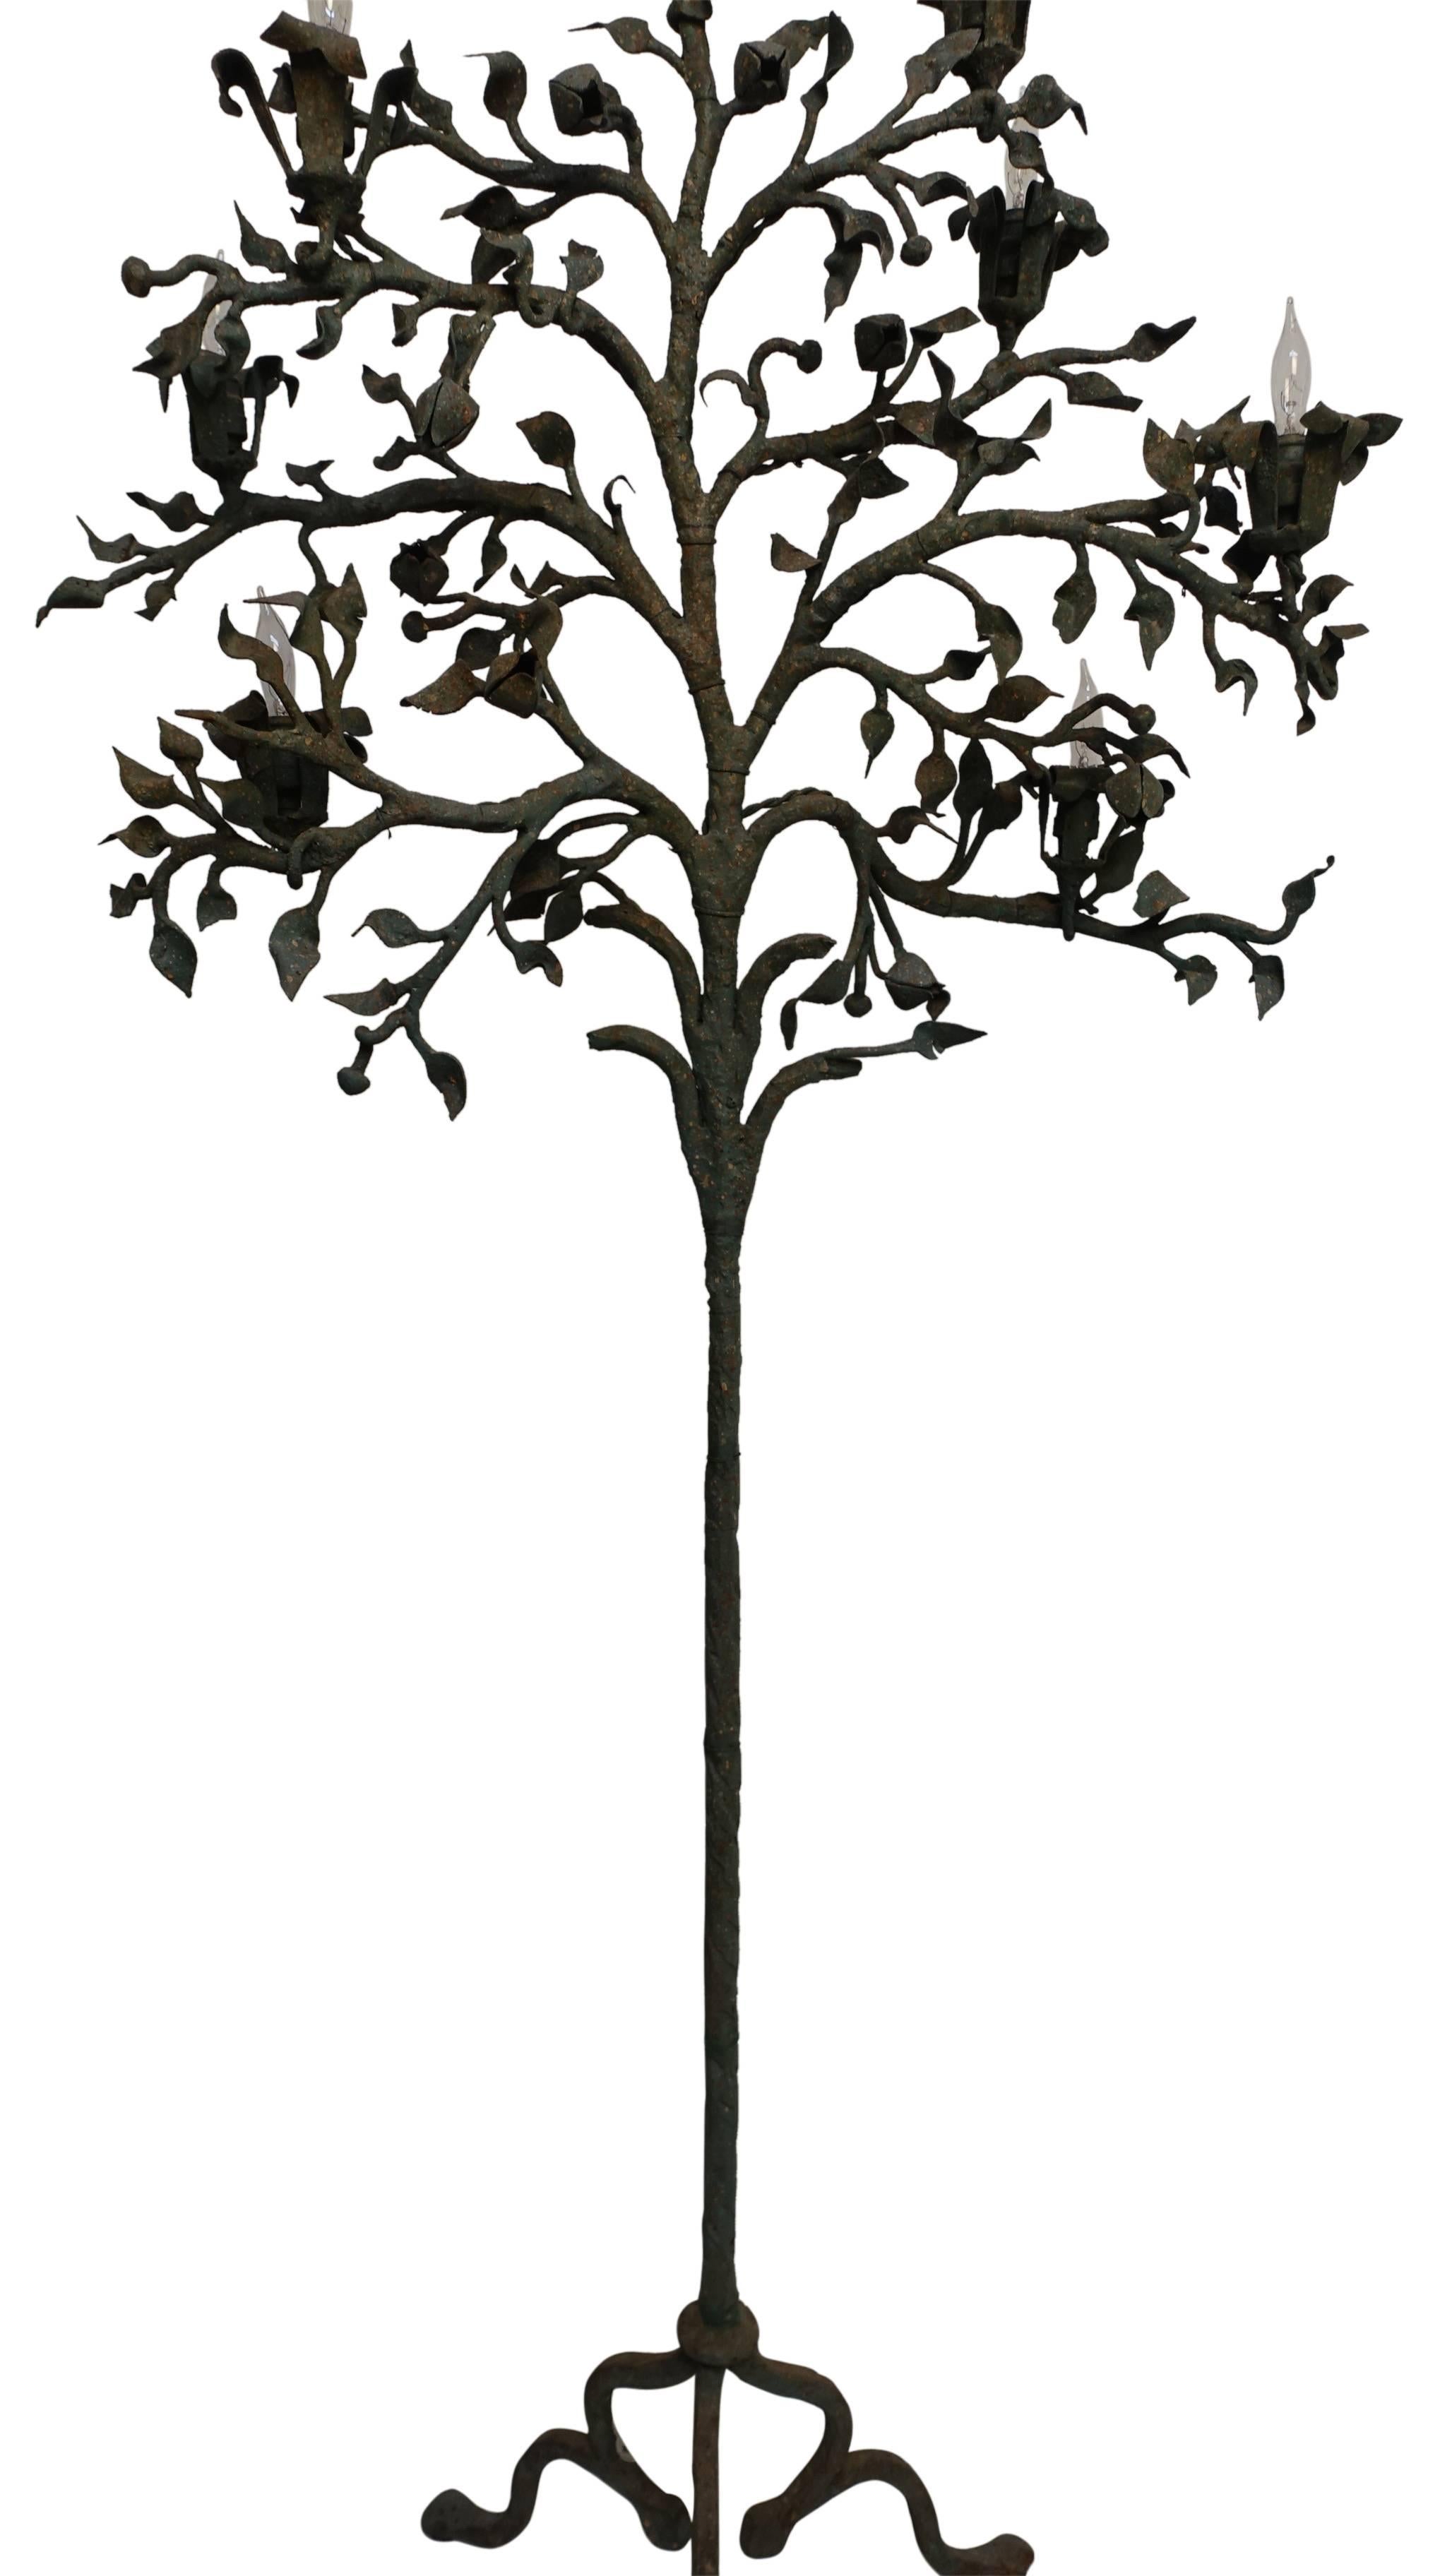 Pair of Wrought Iron Tree Form Torchiere Floor Lamps, Italy, 19th Century 3